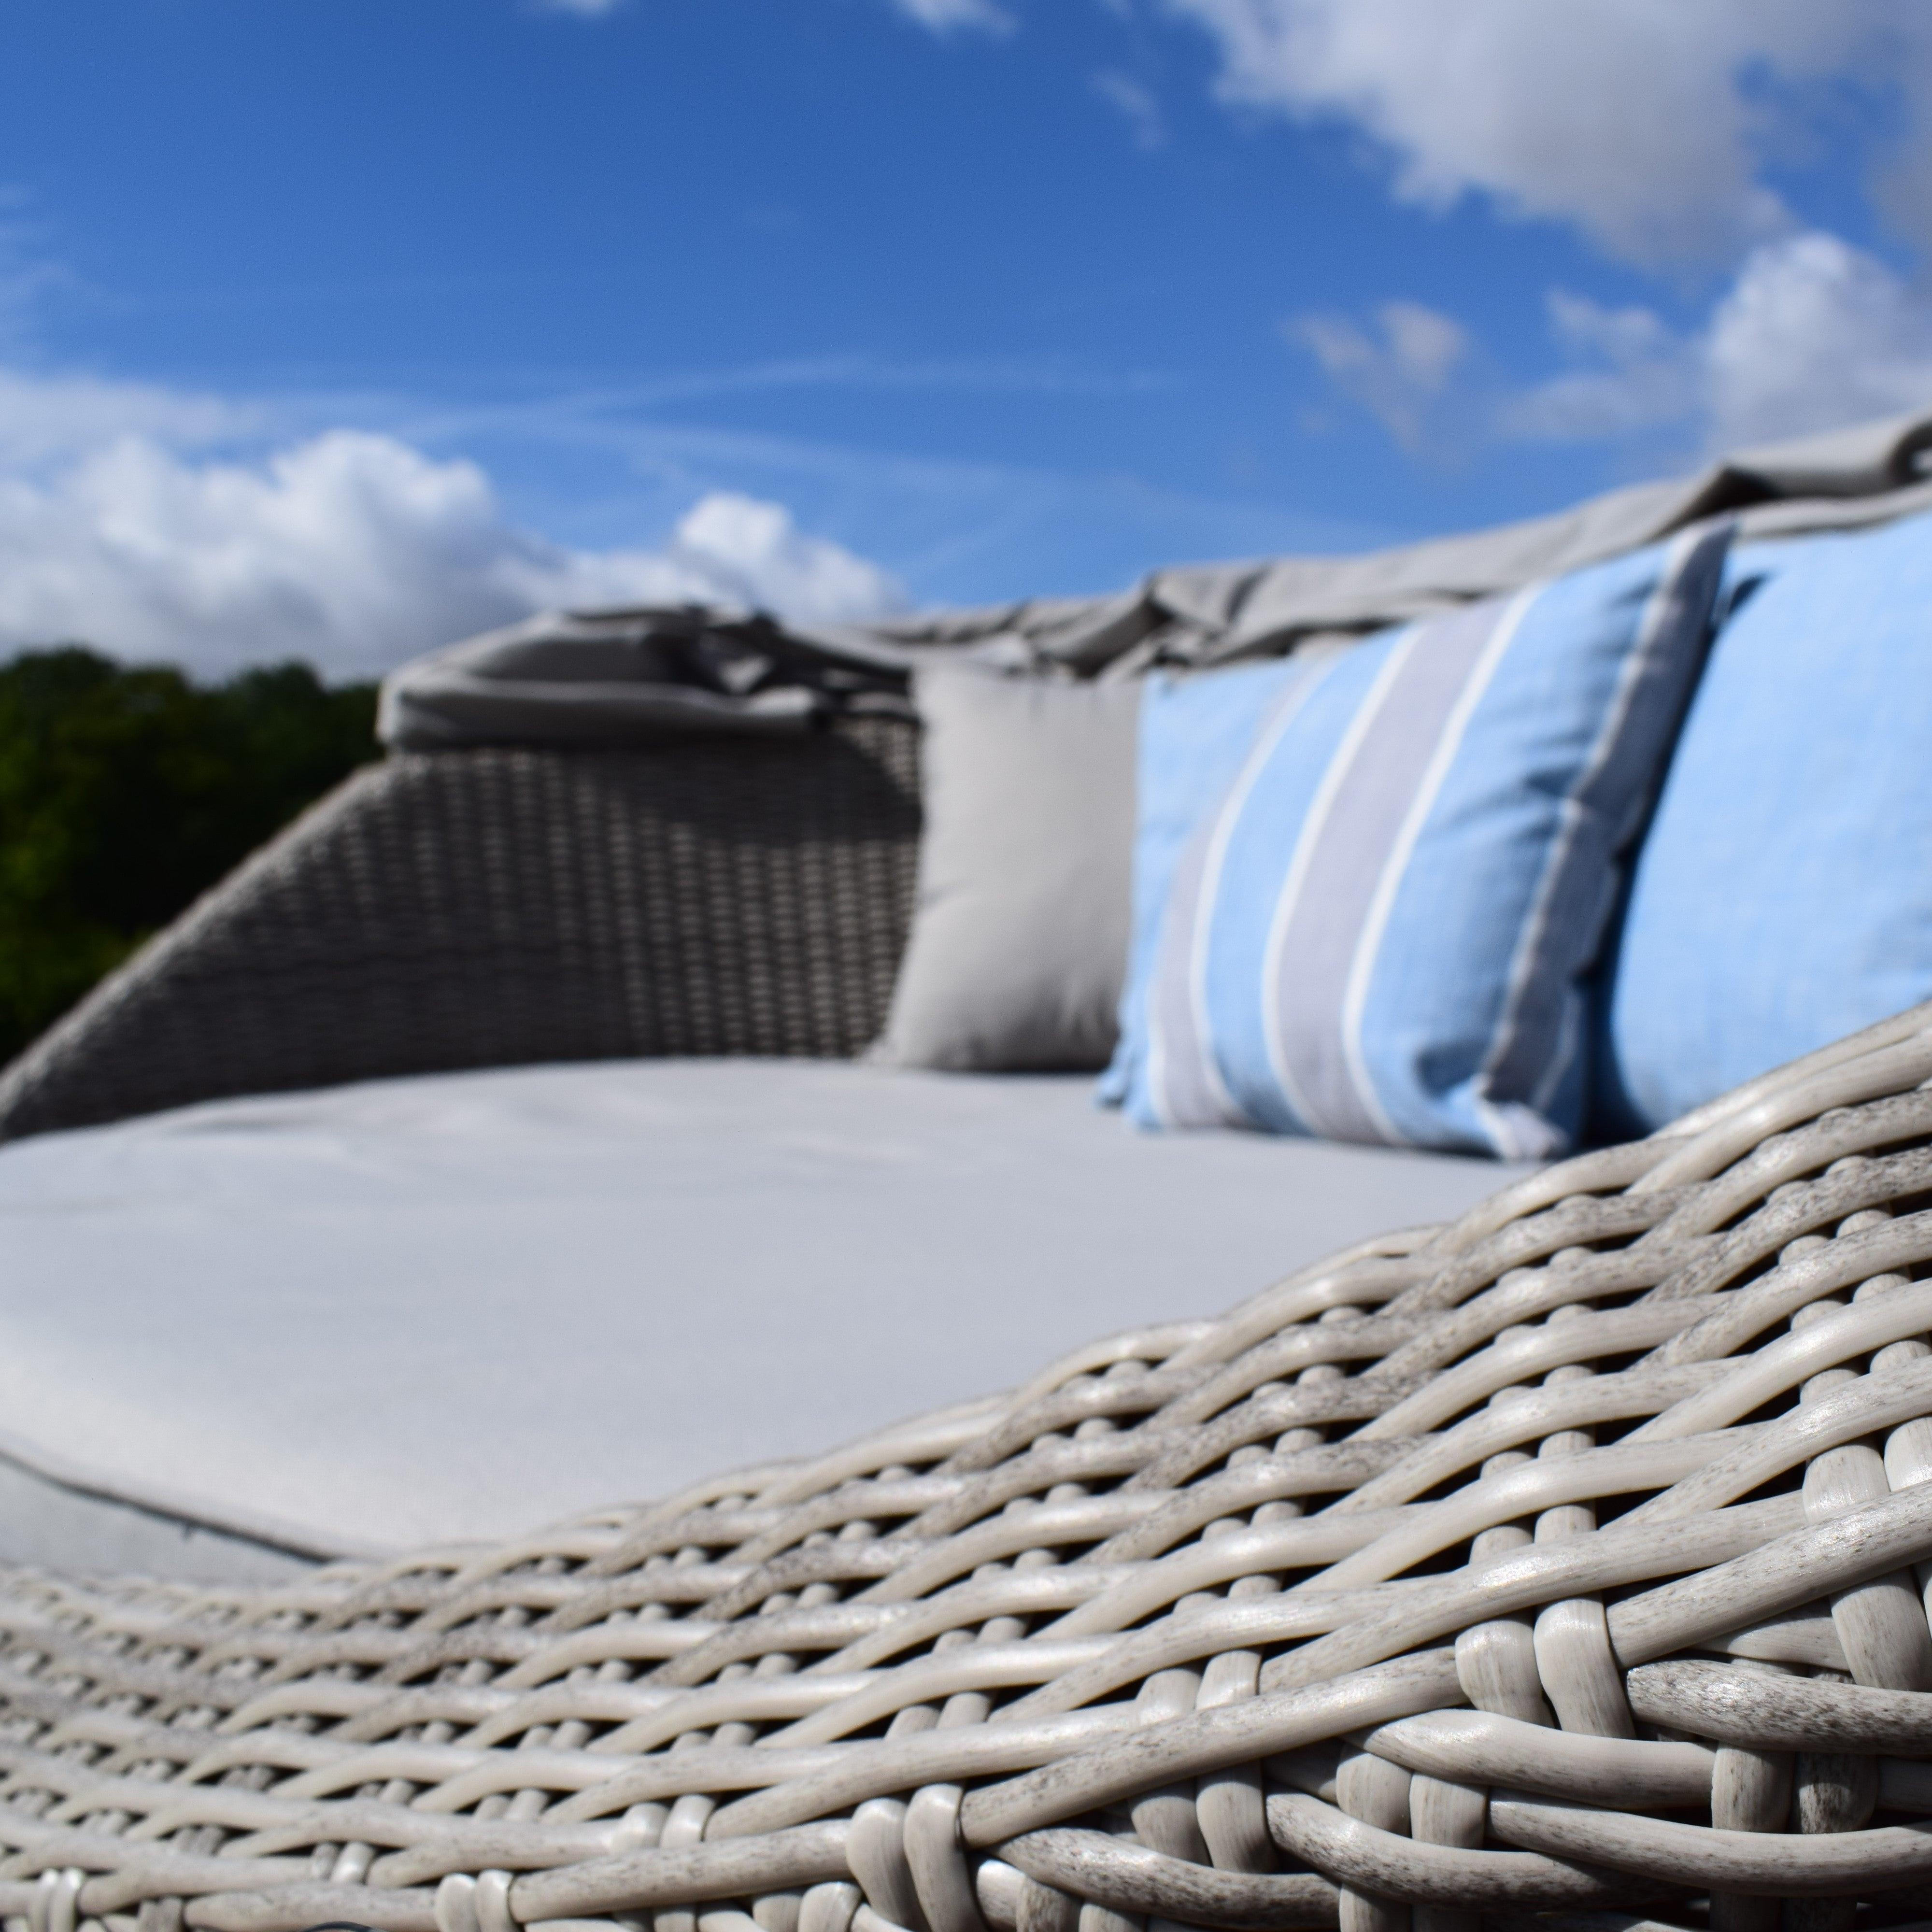 Close up of Cushions on Daybed